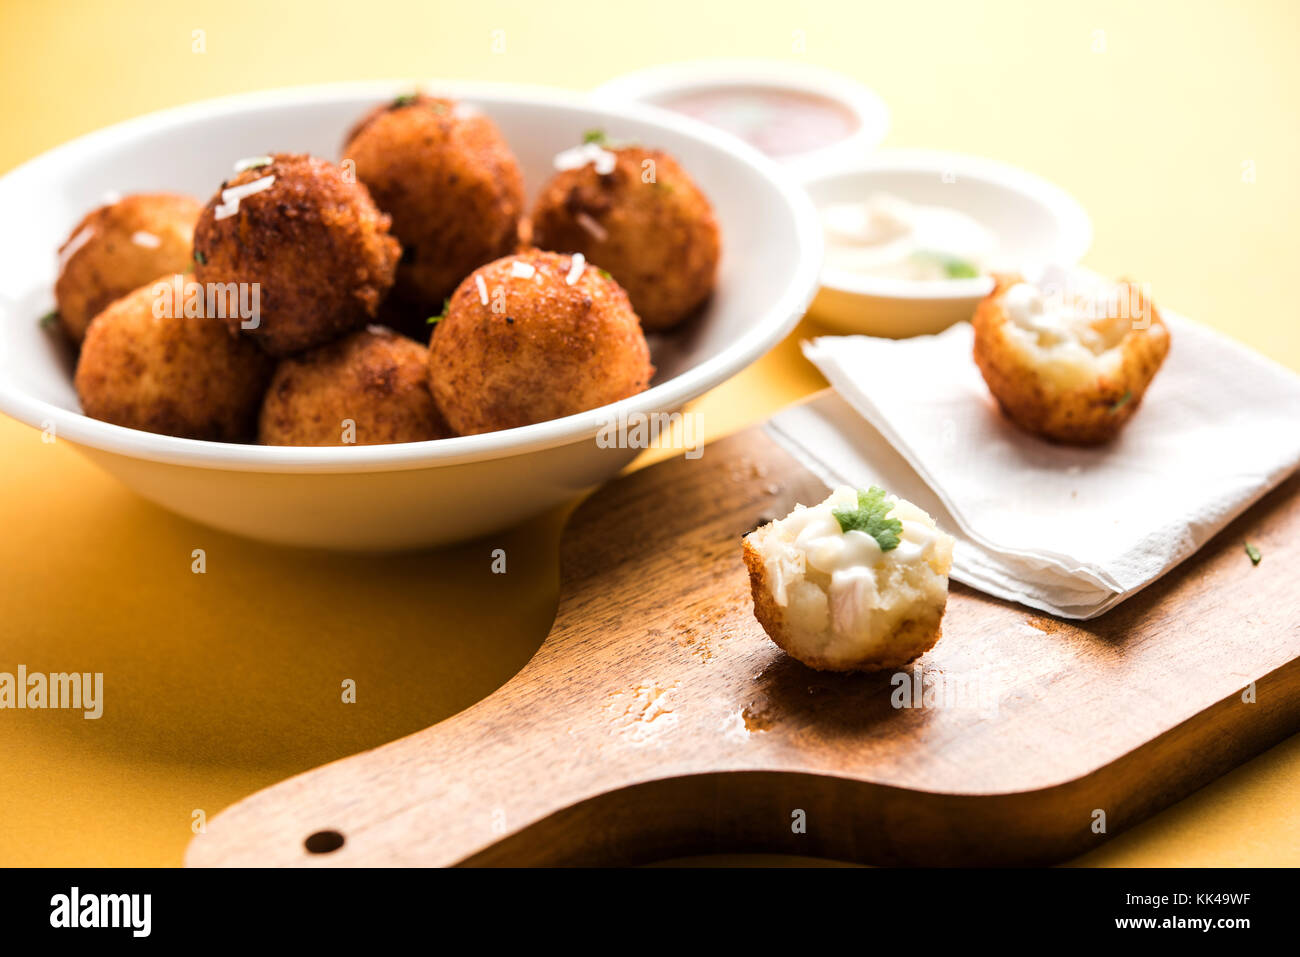 Cheese Balls with French Fries and Sauce Stock Image - Image of tasty,  snack: 180112499